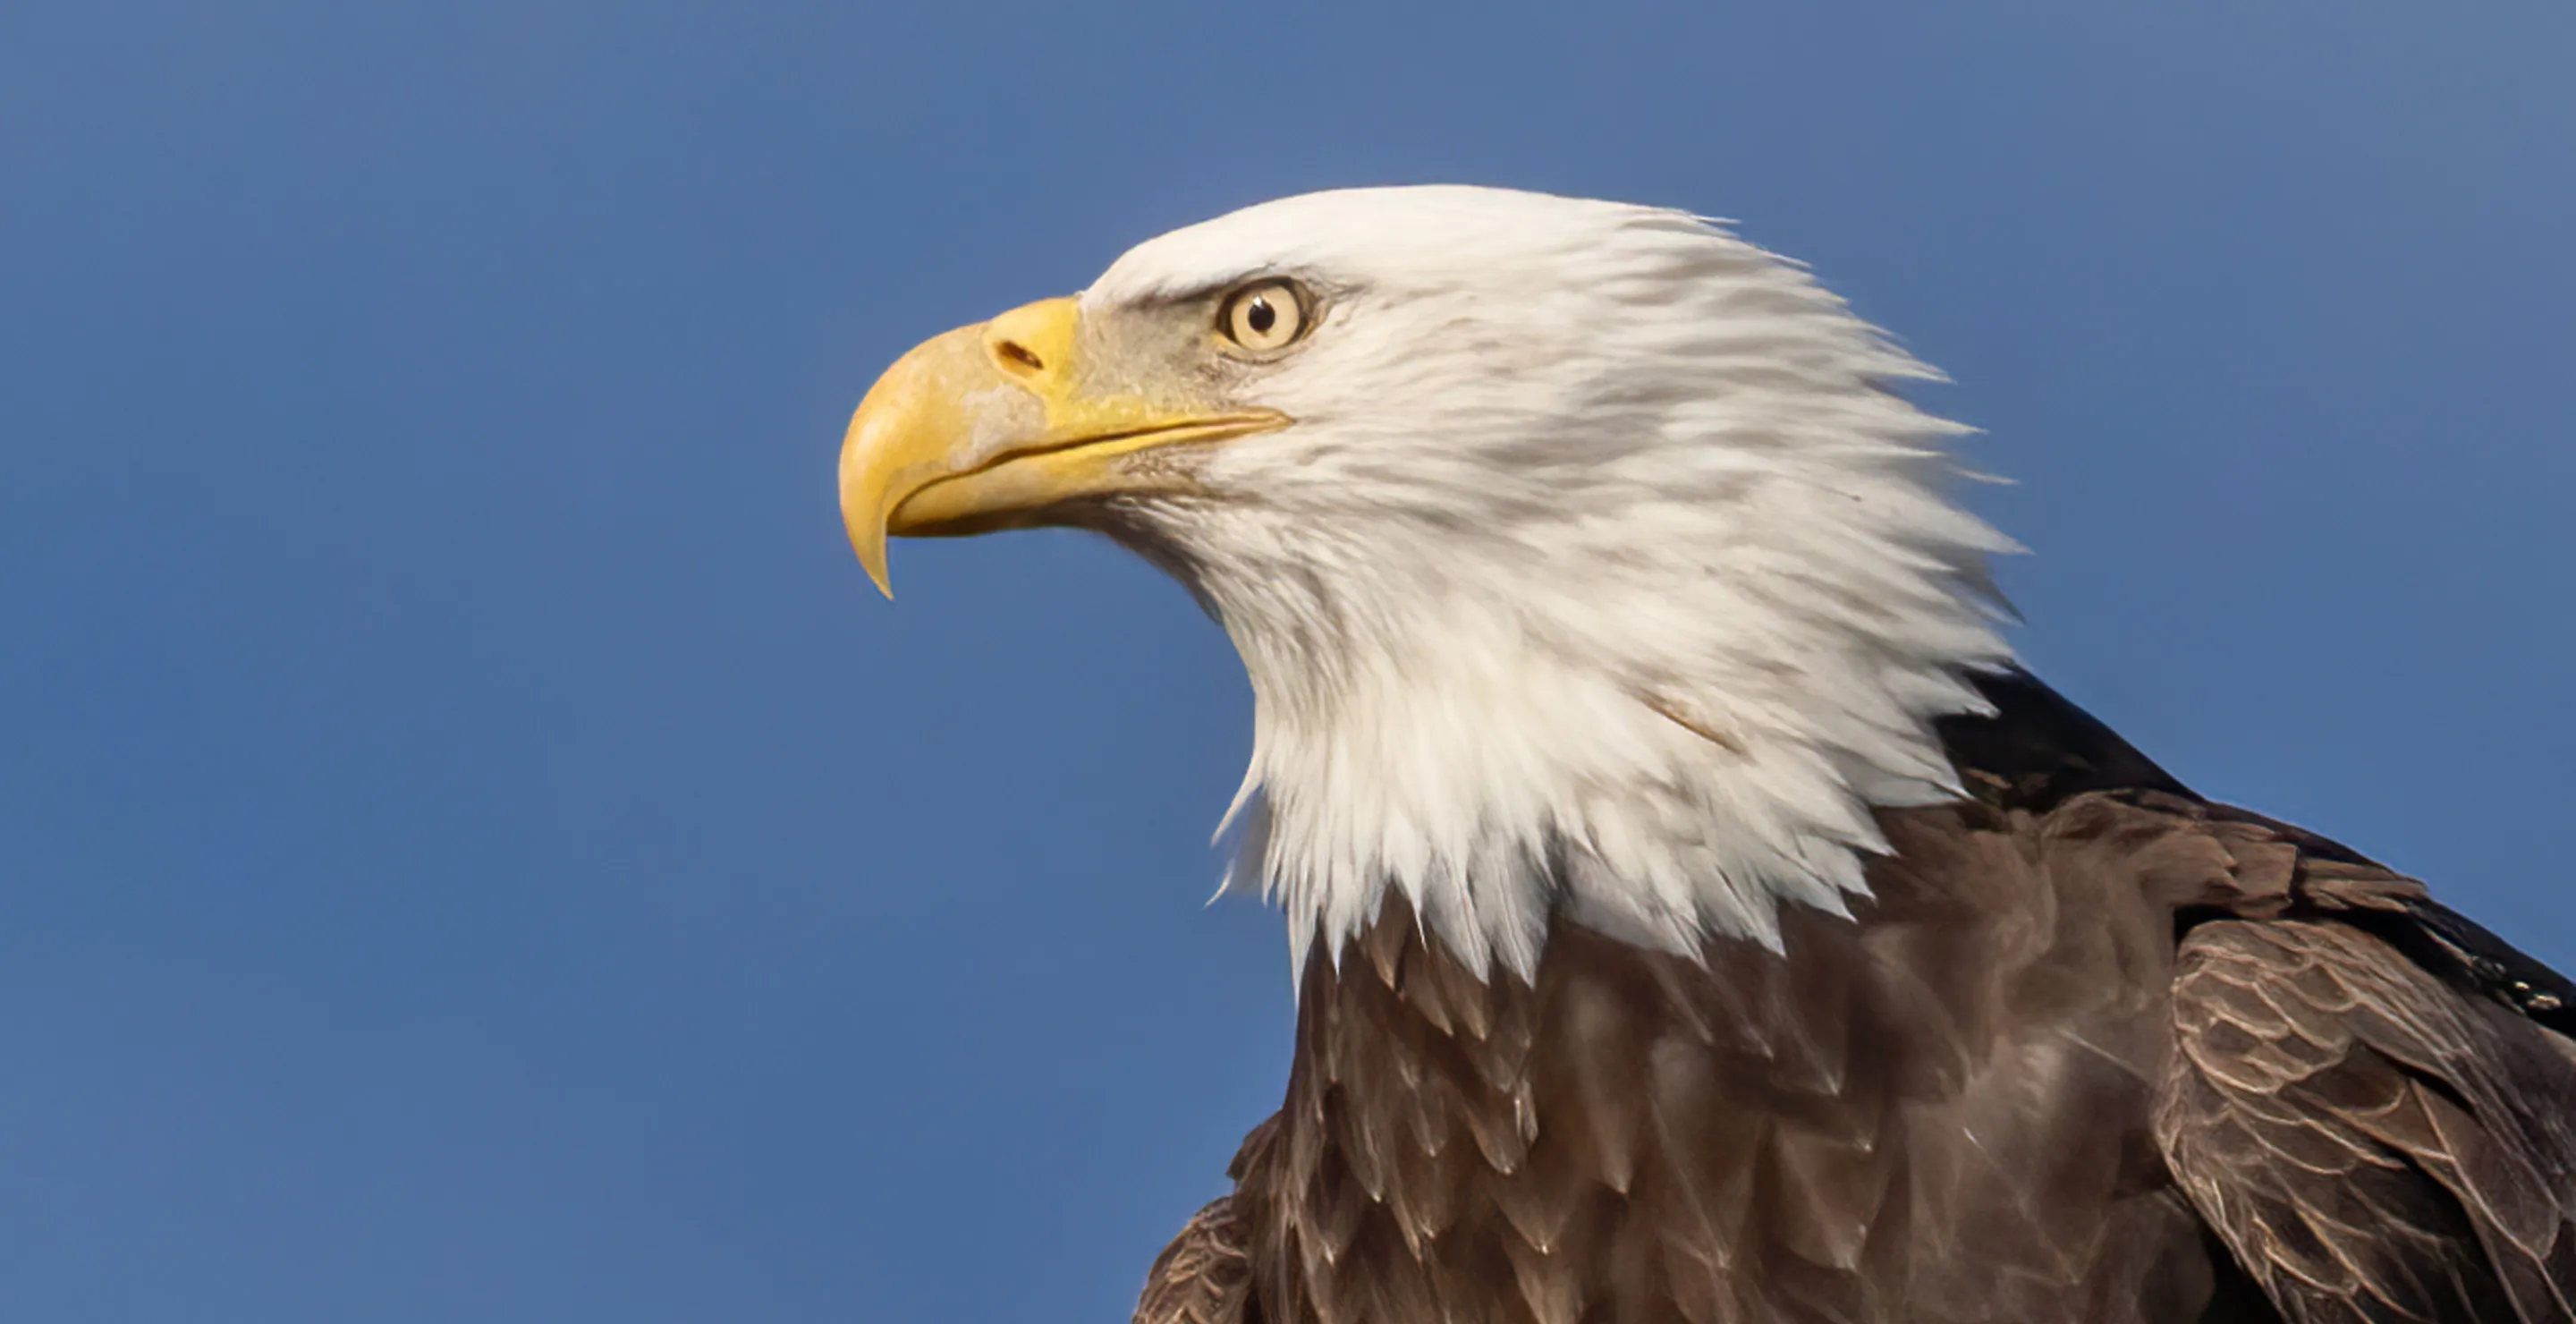 Alaskan Residents Are Living In Fear Due To String Of Unprovoked Bald Eagle Attacks